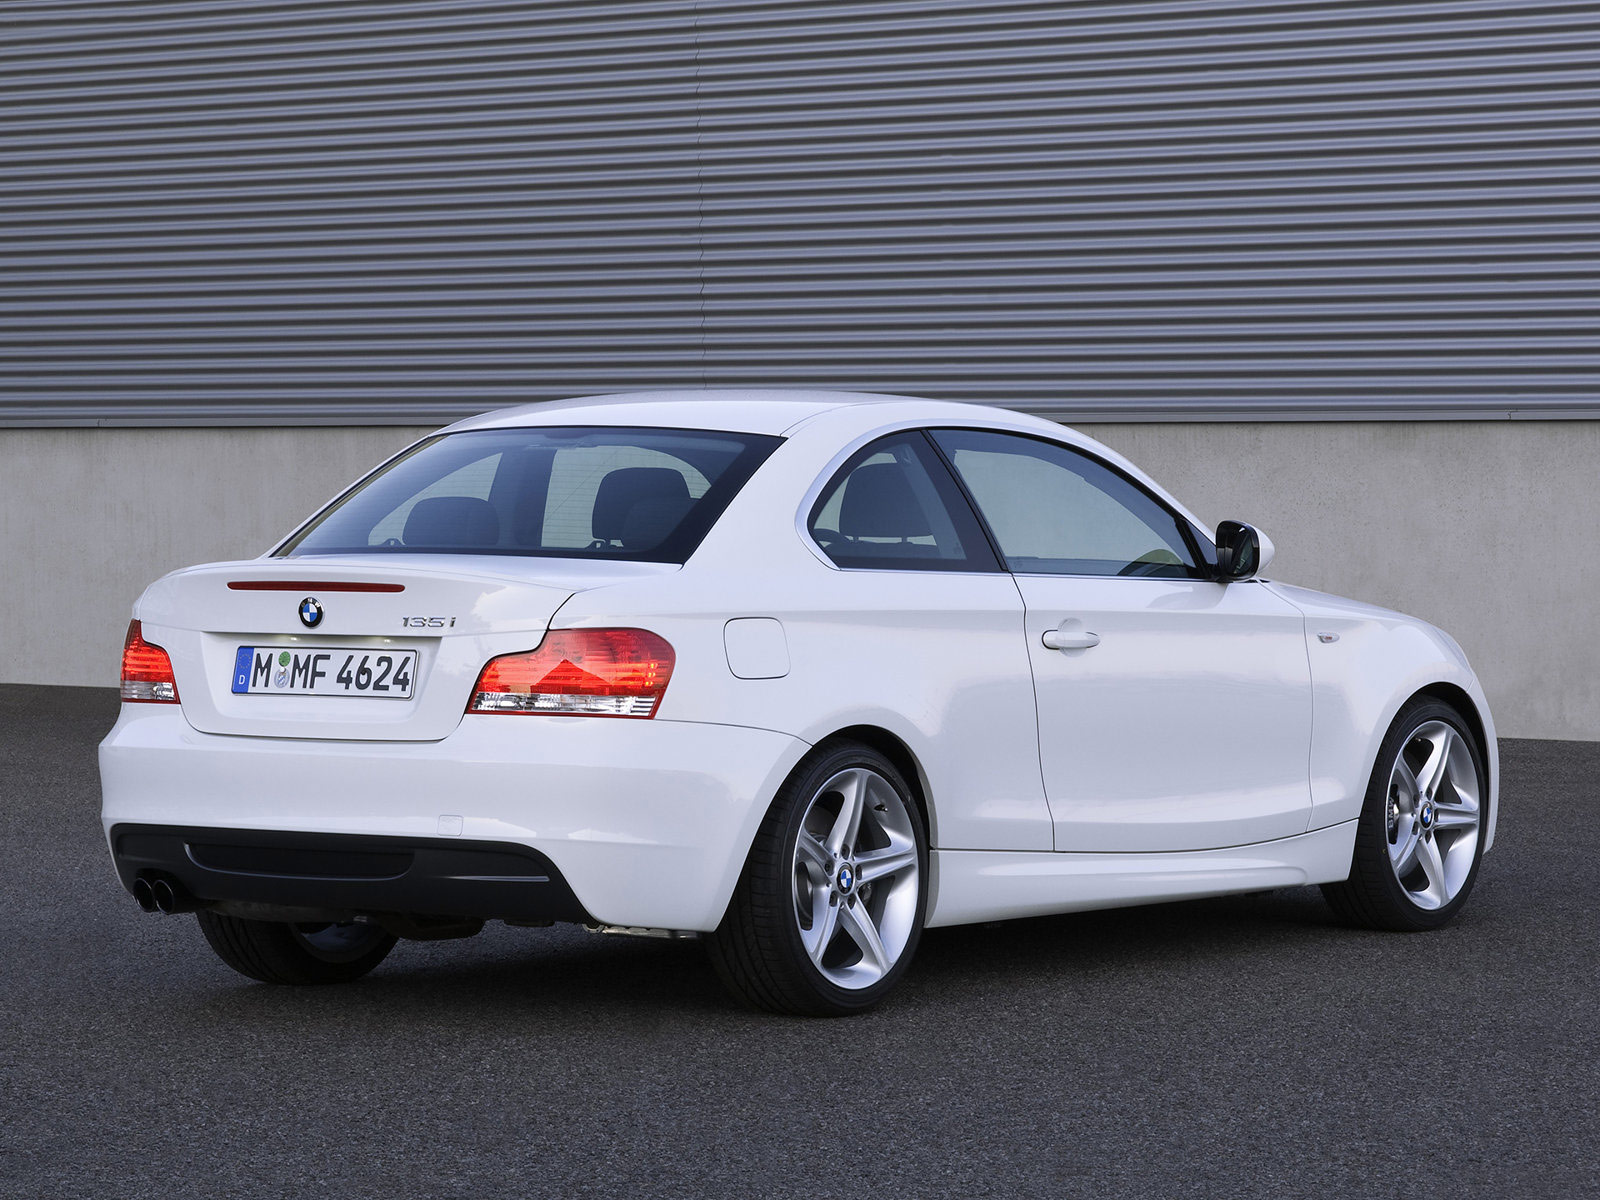 2010 BMW 135i Coupe car accident lawyers | wallpapers |